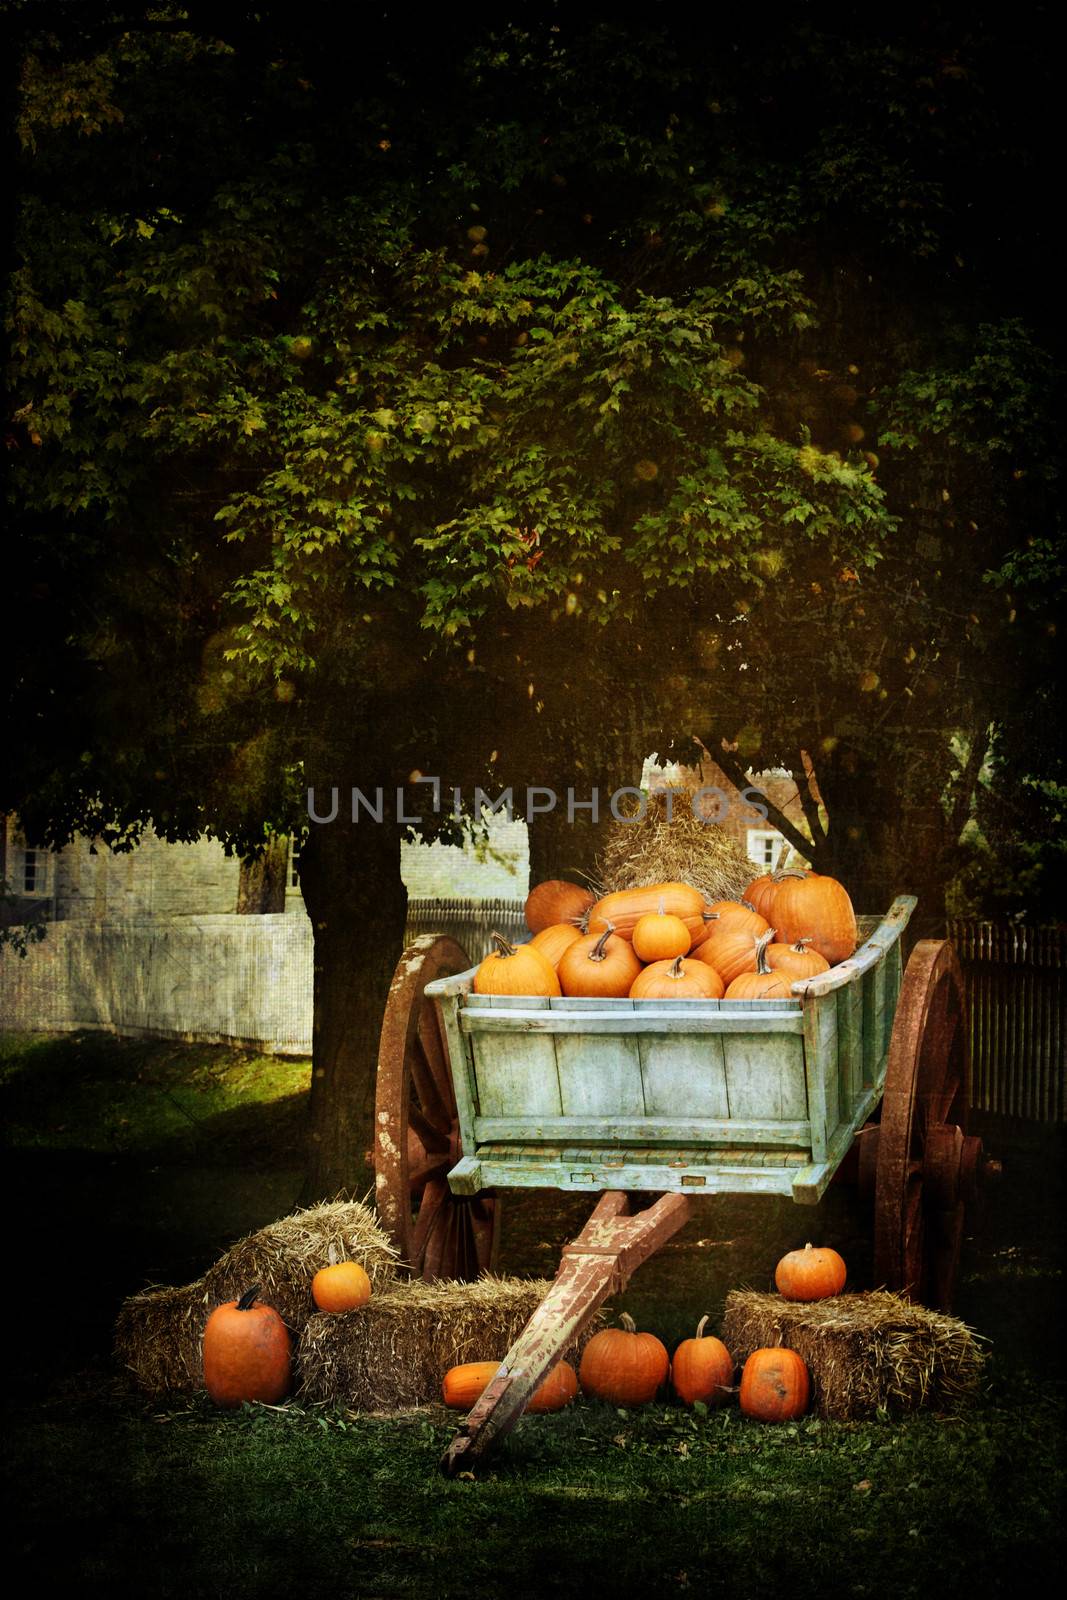 Wagon load full of pumpkins under a shady oak tree for sale with a painterly effect.